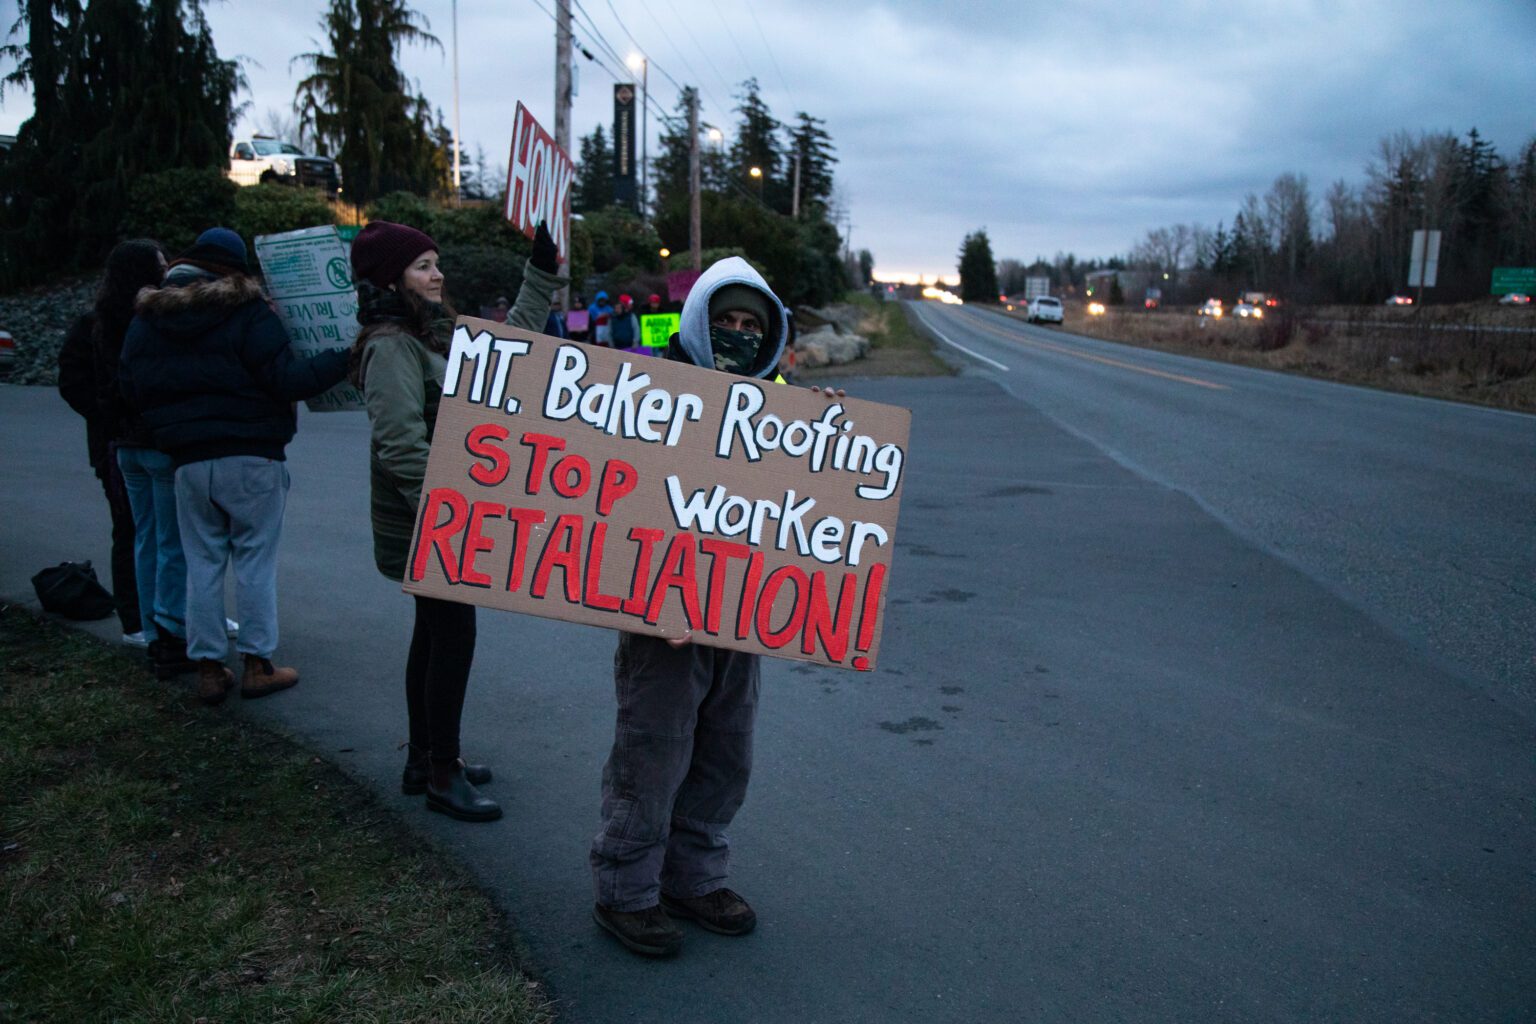 A Mt. Baker Roofing employee holds a sign calling for the end to worker retaliation Feb. 14. A work stoppage occurred following allegations of the company failing to provide bathrooms